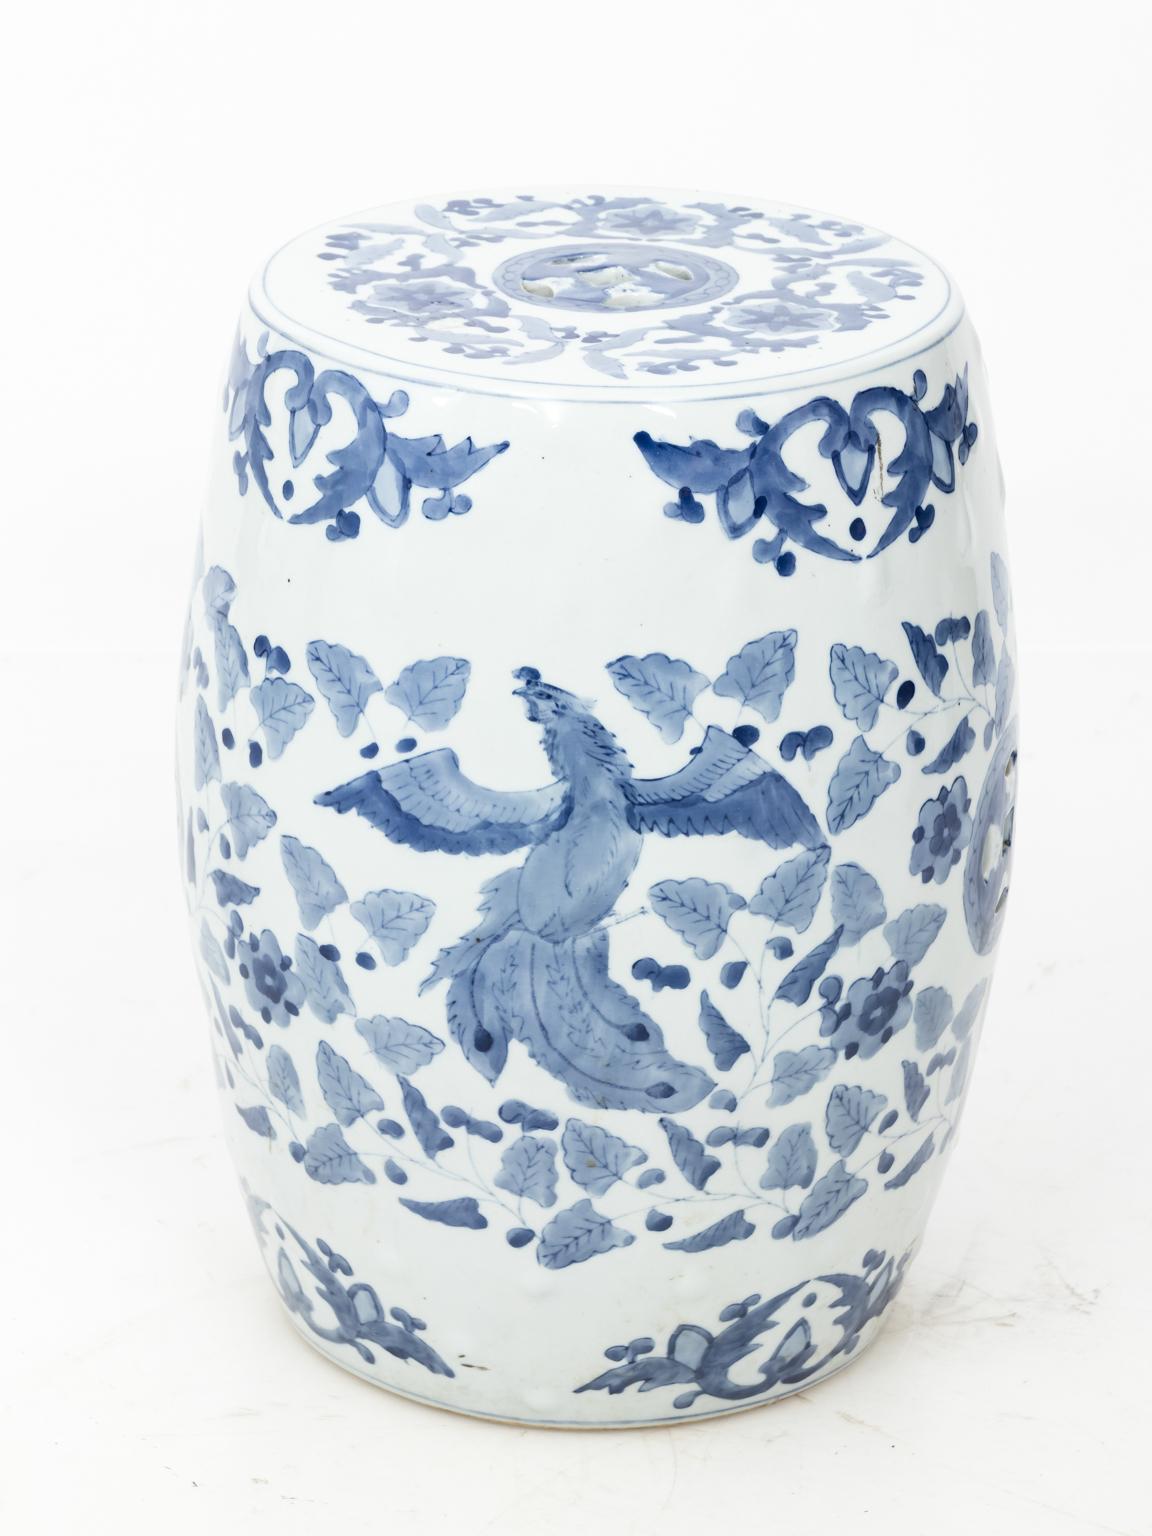 Painted Blue and White Chinese Porcelain Garden Seat with Phoenix Motif